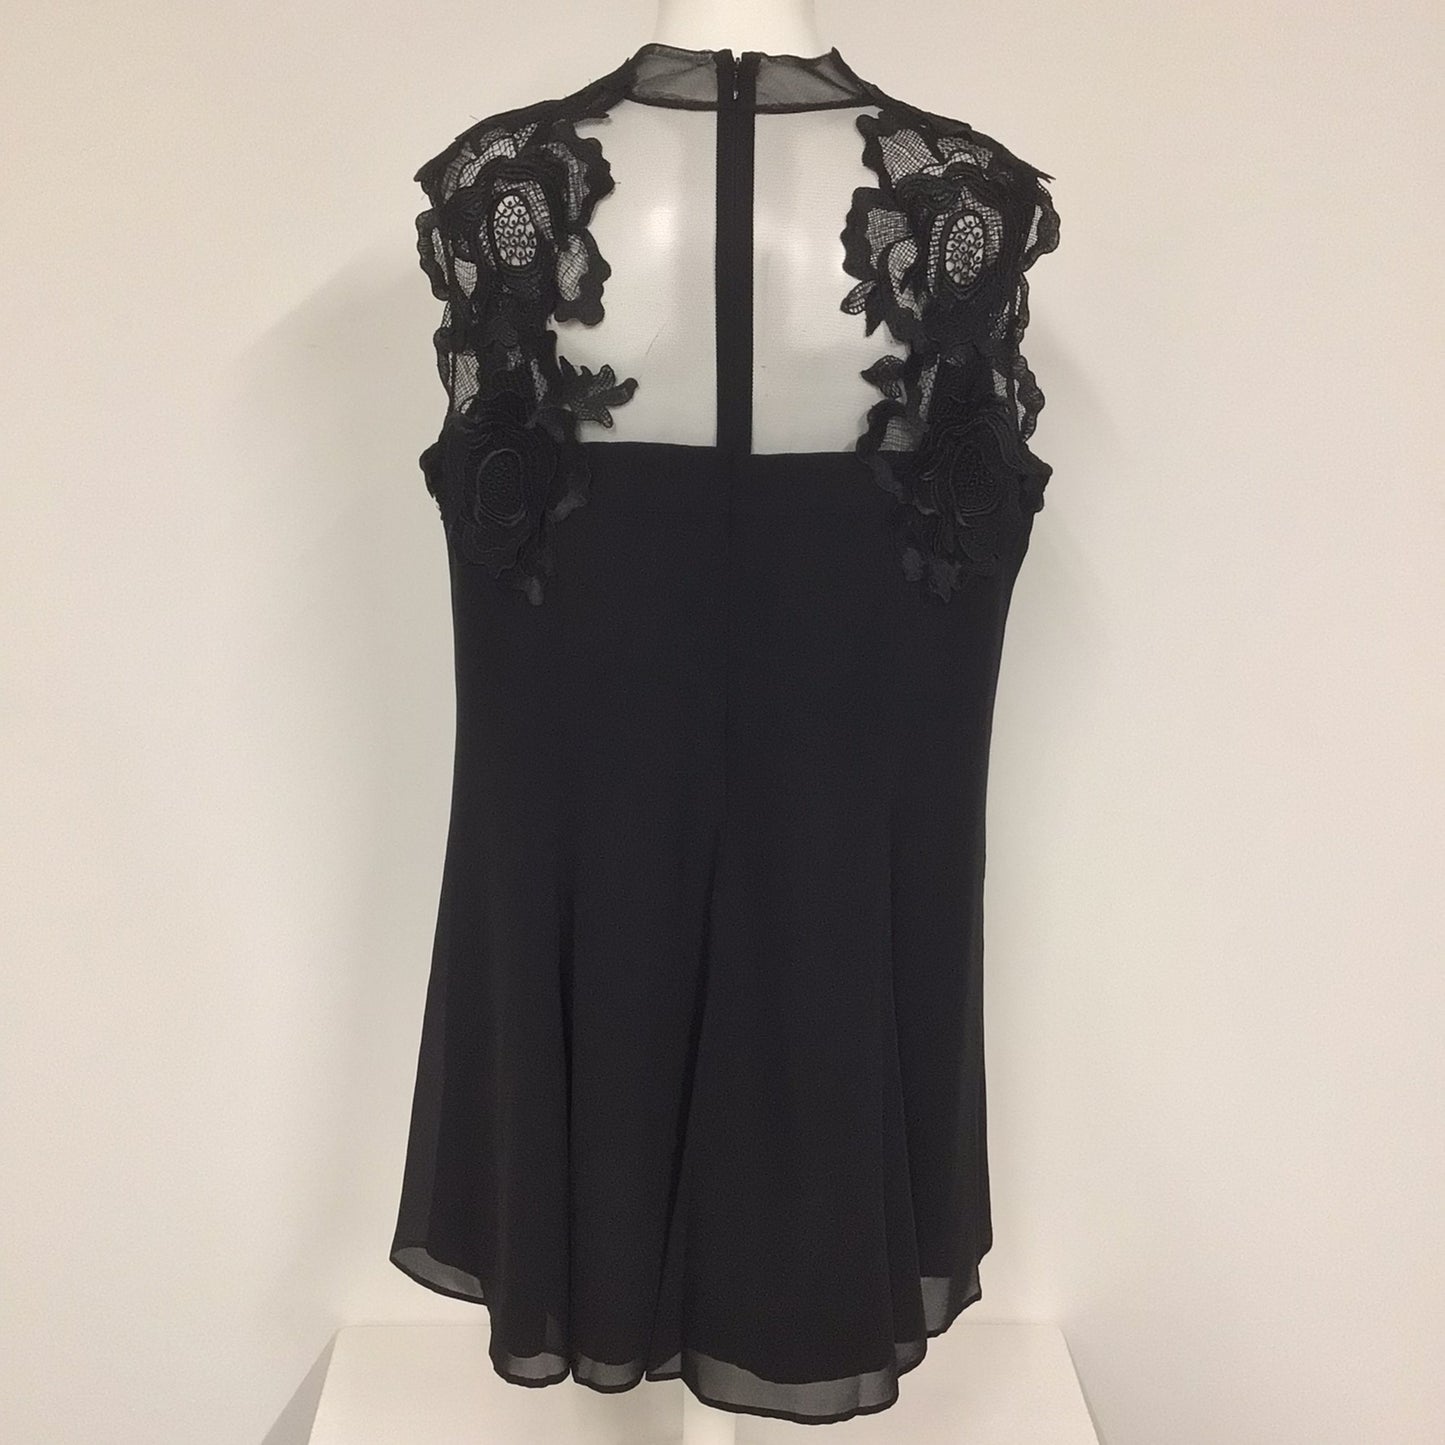 Monsoon Black Embroidered Lace High Neck Dress Size 18